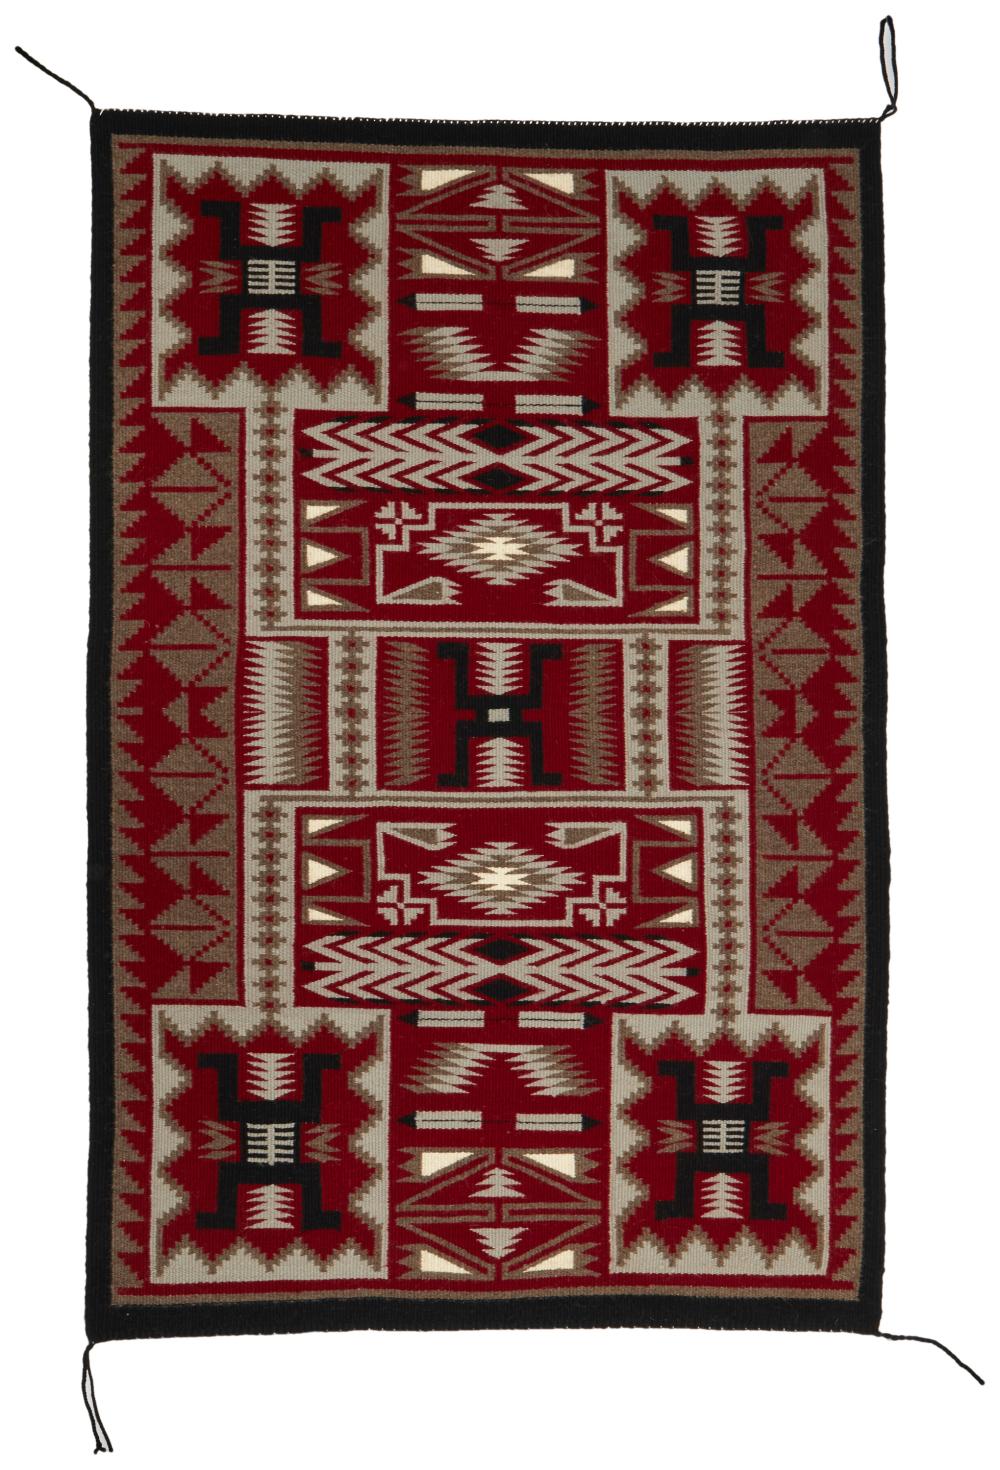 A NAVAJO STORM VARIANT RUG, BY